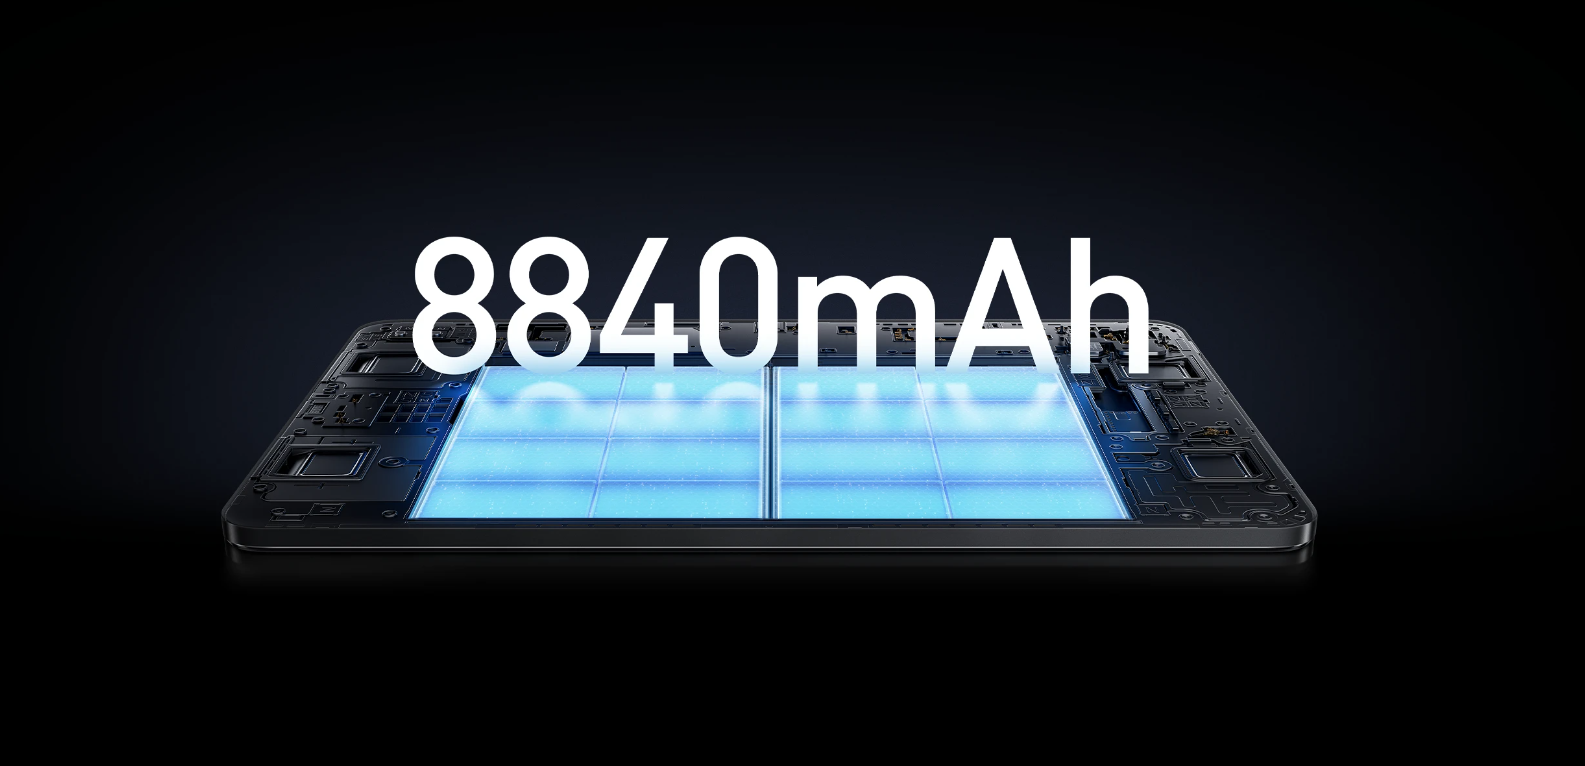 A Solid Mid-Range Option: Introducing the Xiaomi Pad 6-Chargerlab